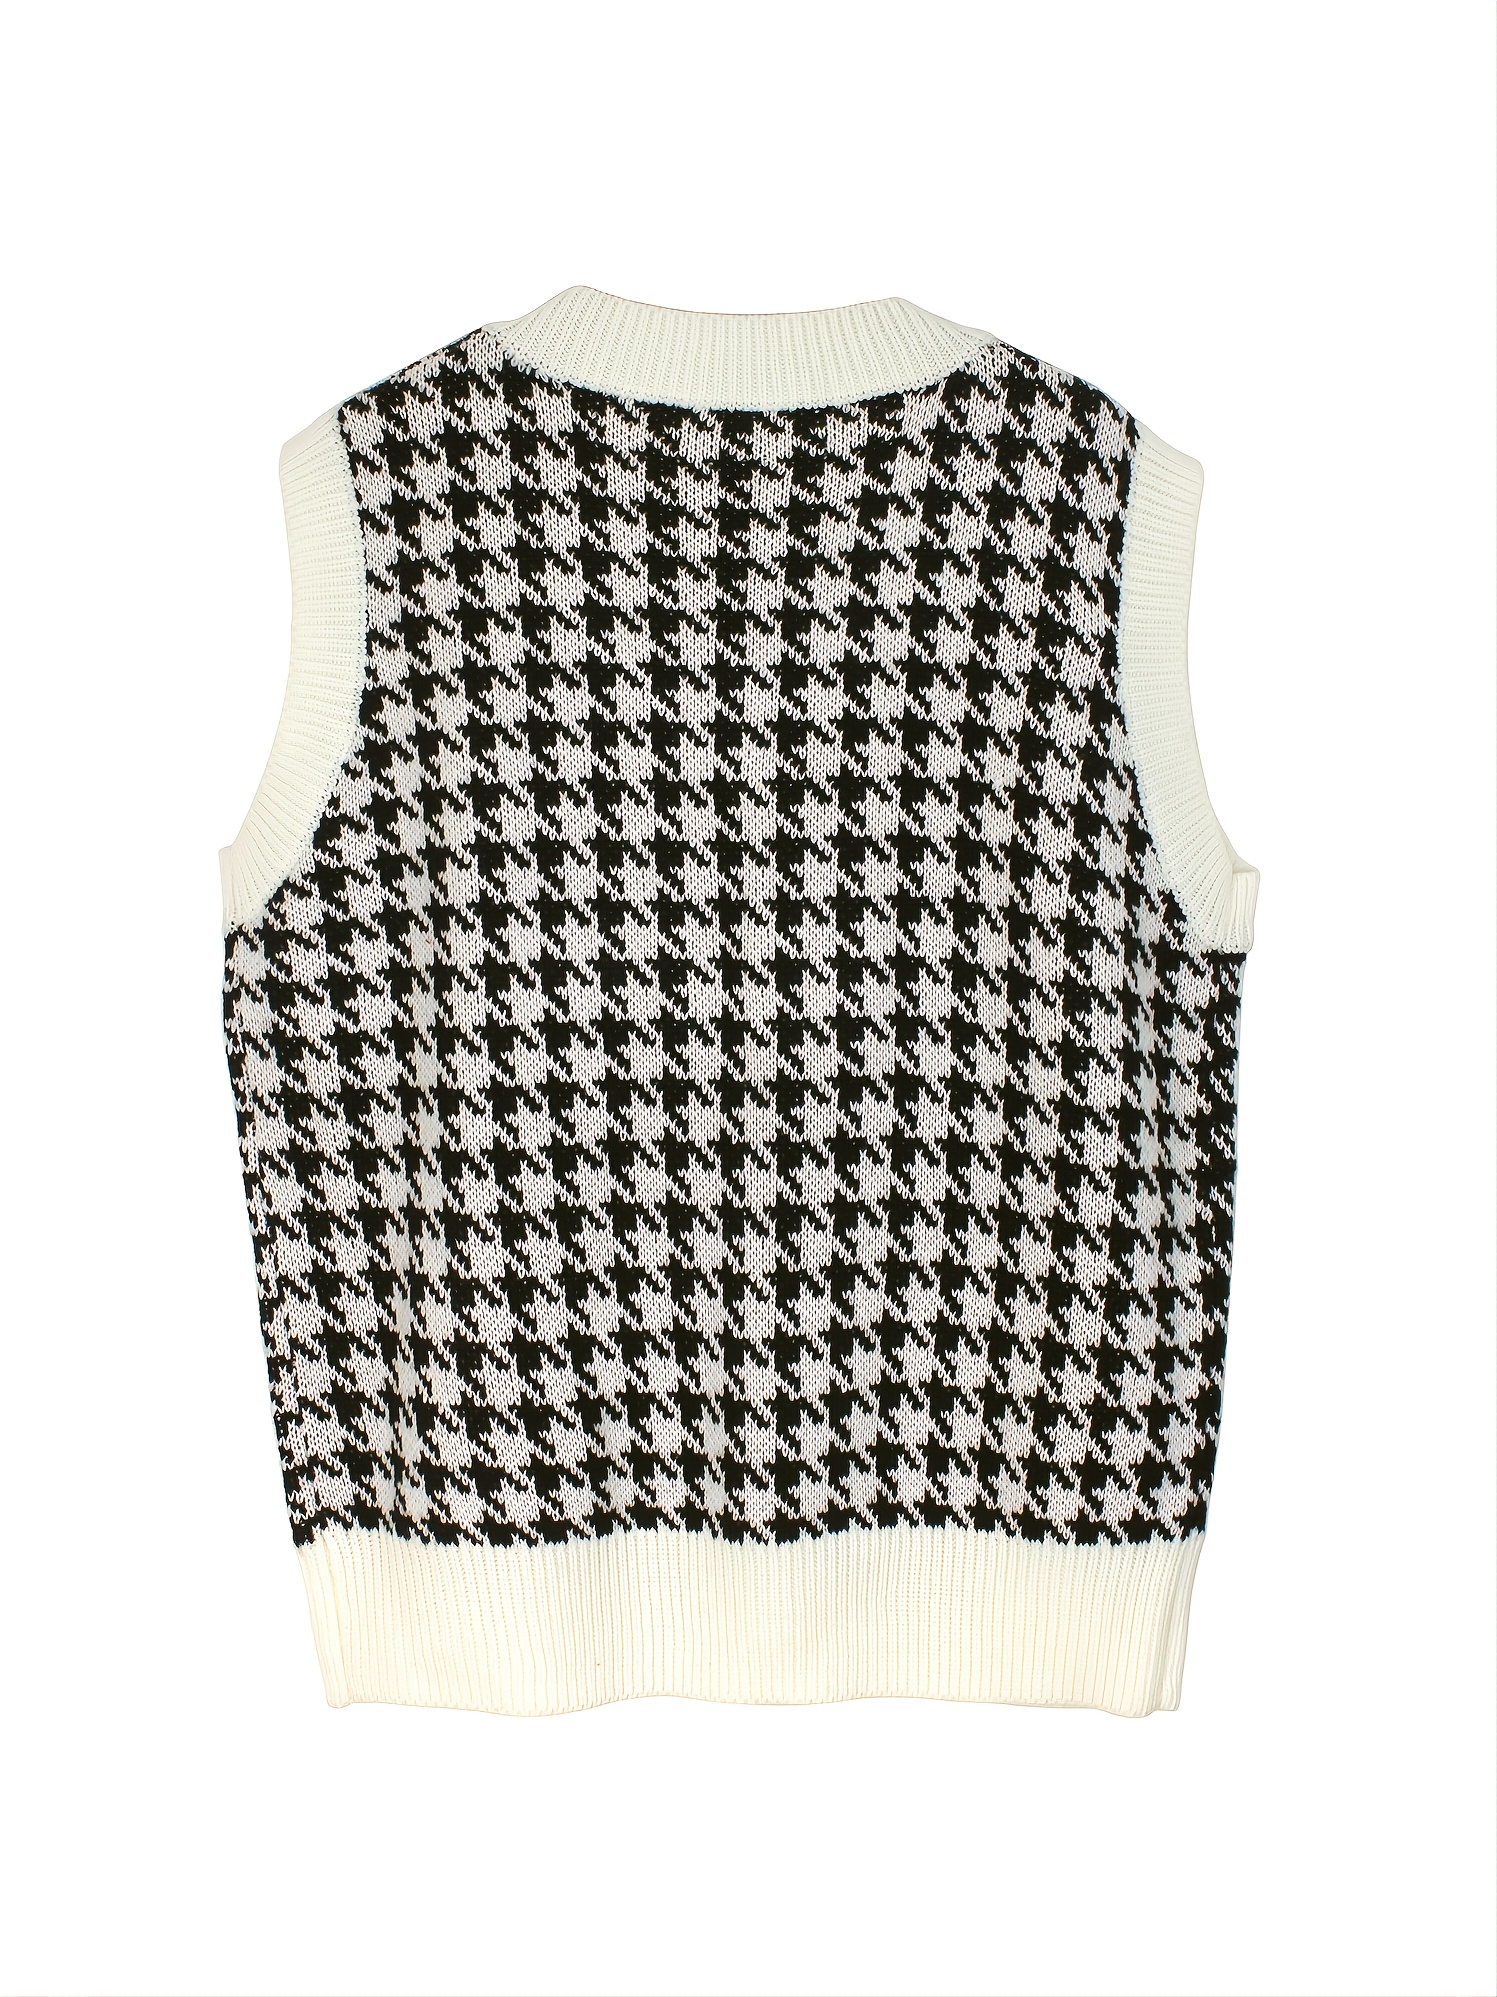 Houndstooth Loose Sweater Vests, Casual V-Neck Sleeveless Fall Winter Knit  Sweater Vest, Women's Clothing